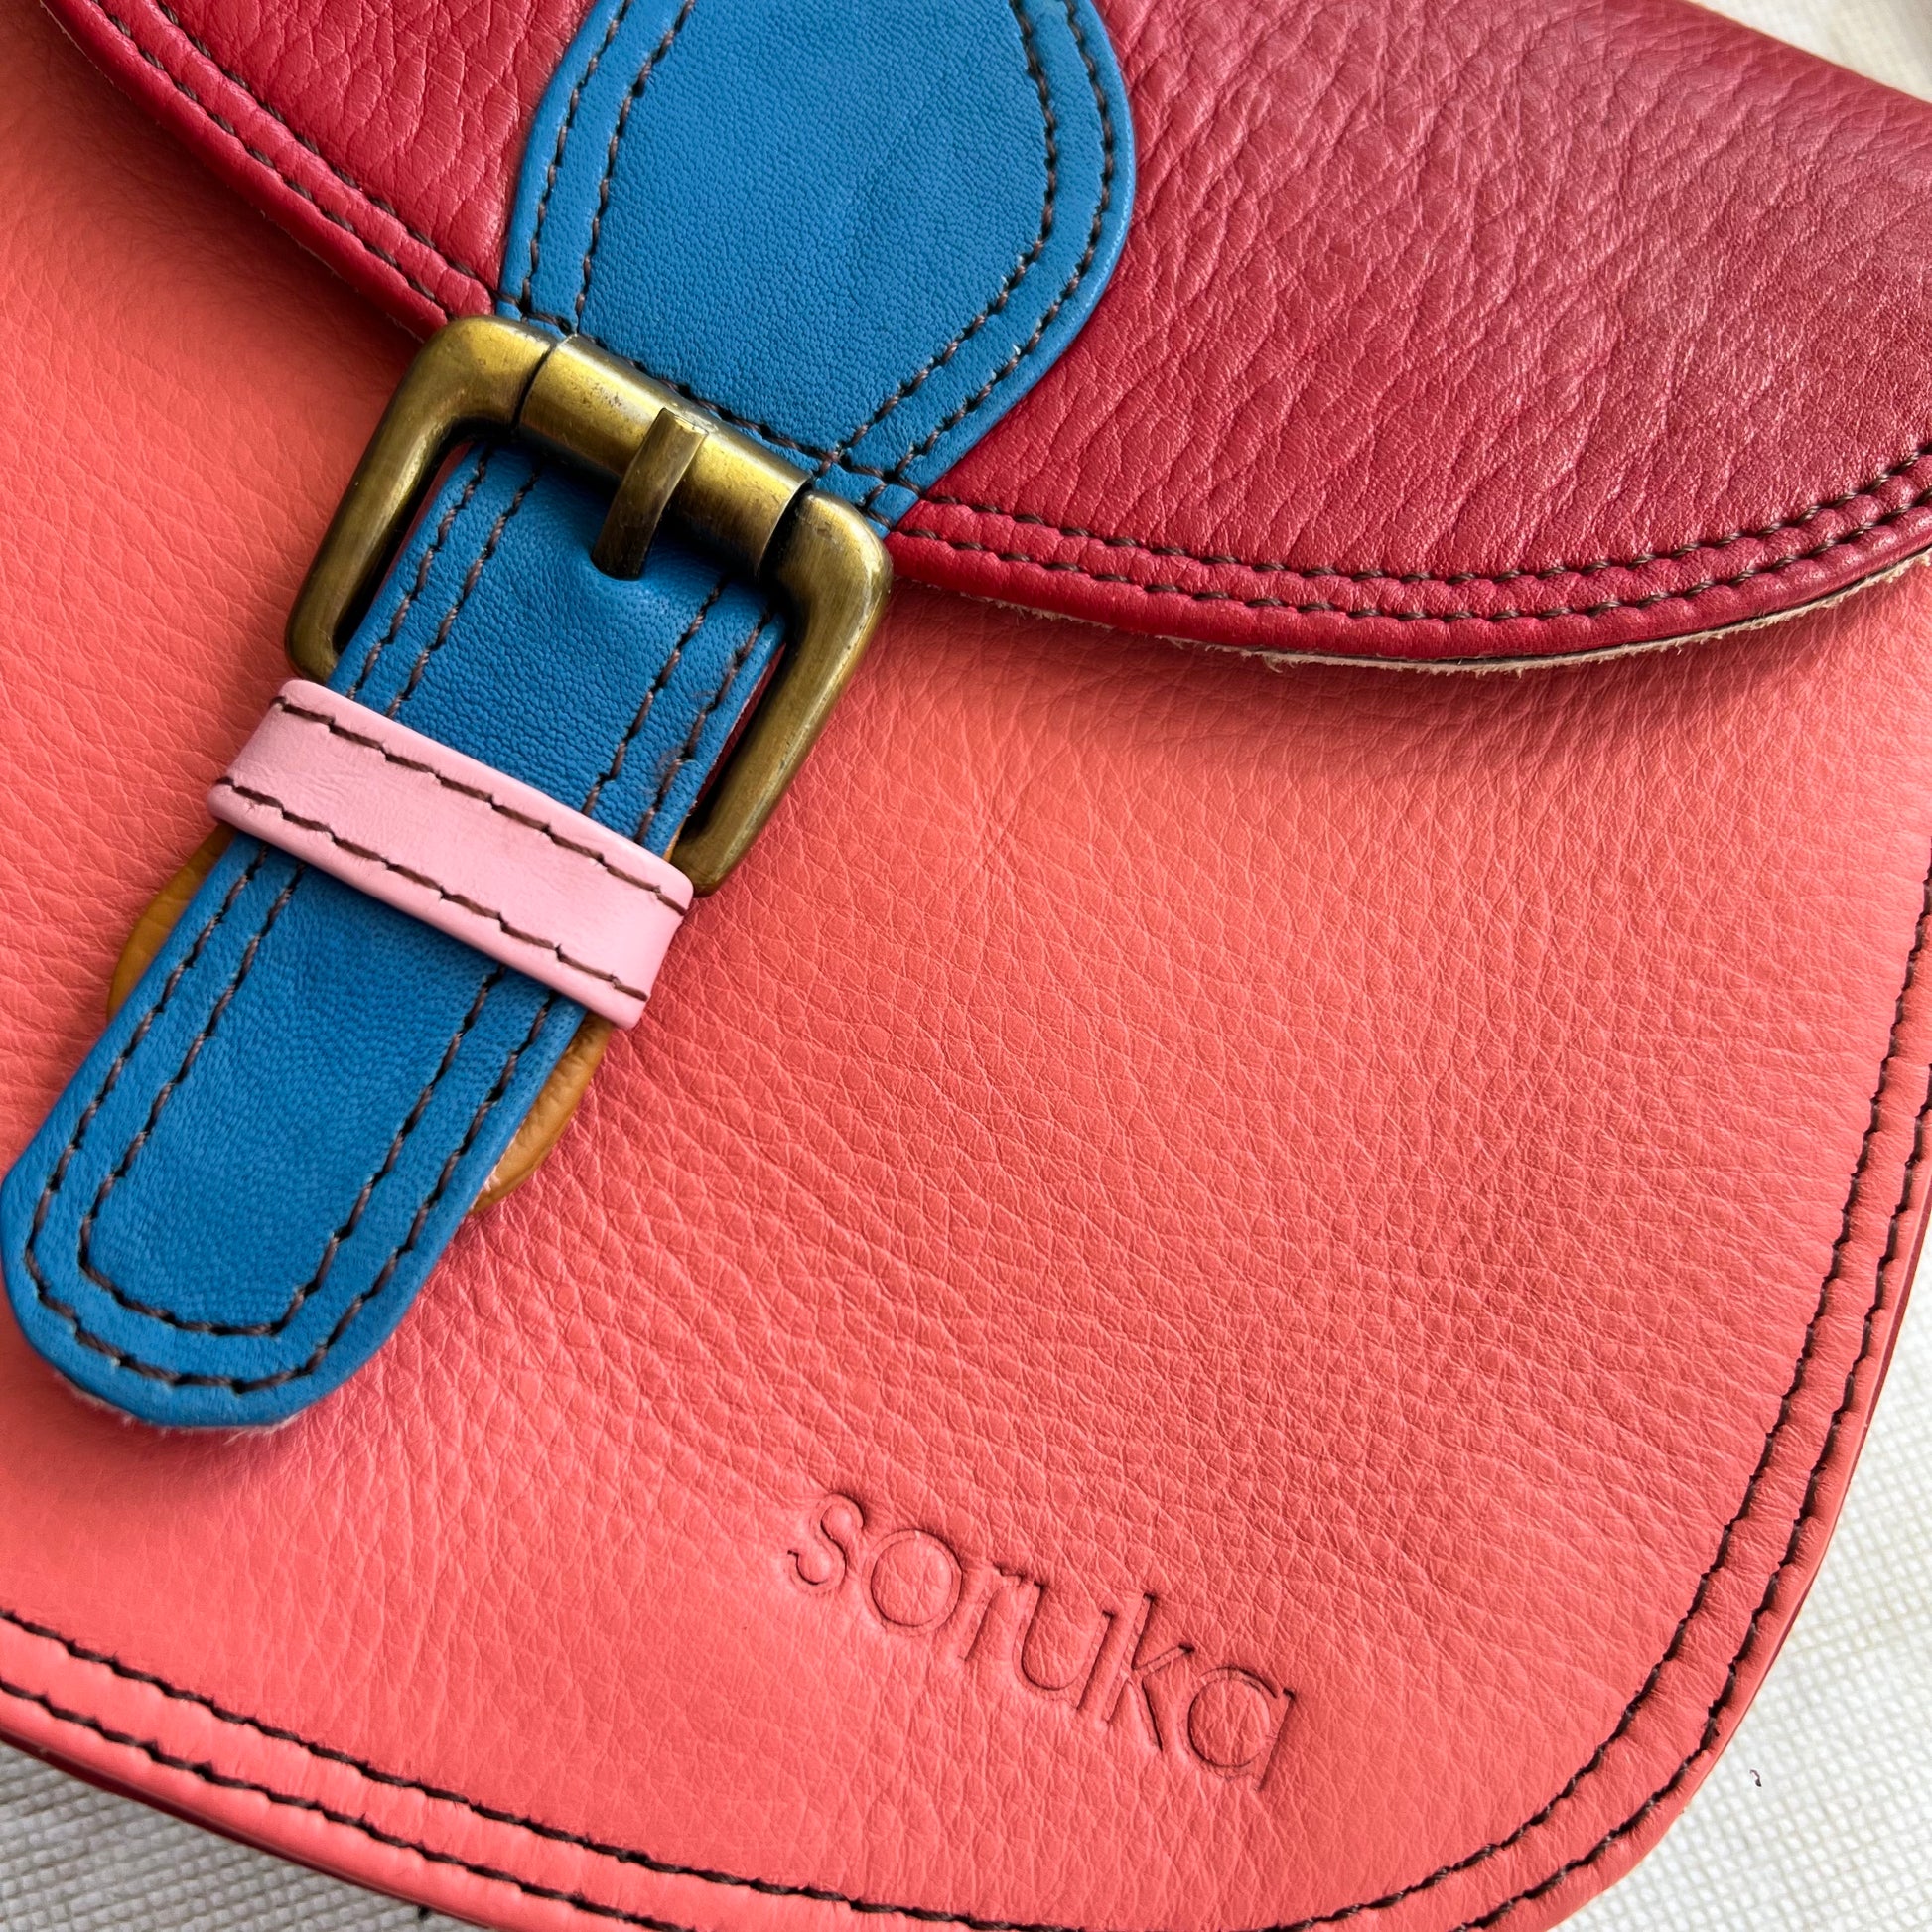 Close-up of buckle and stamped "soruka" logo.